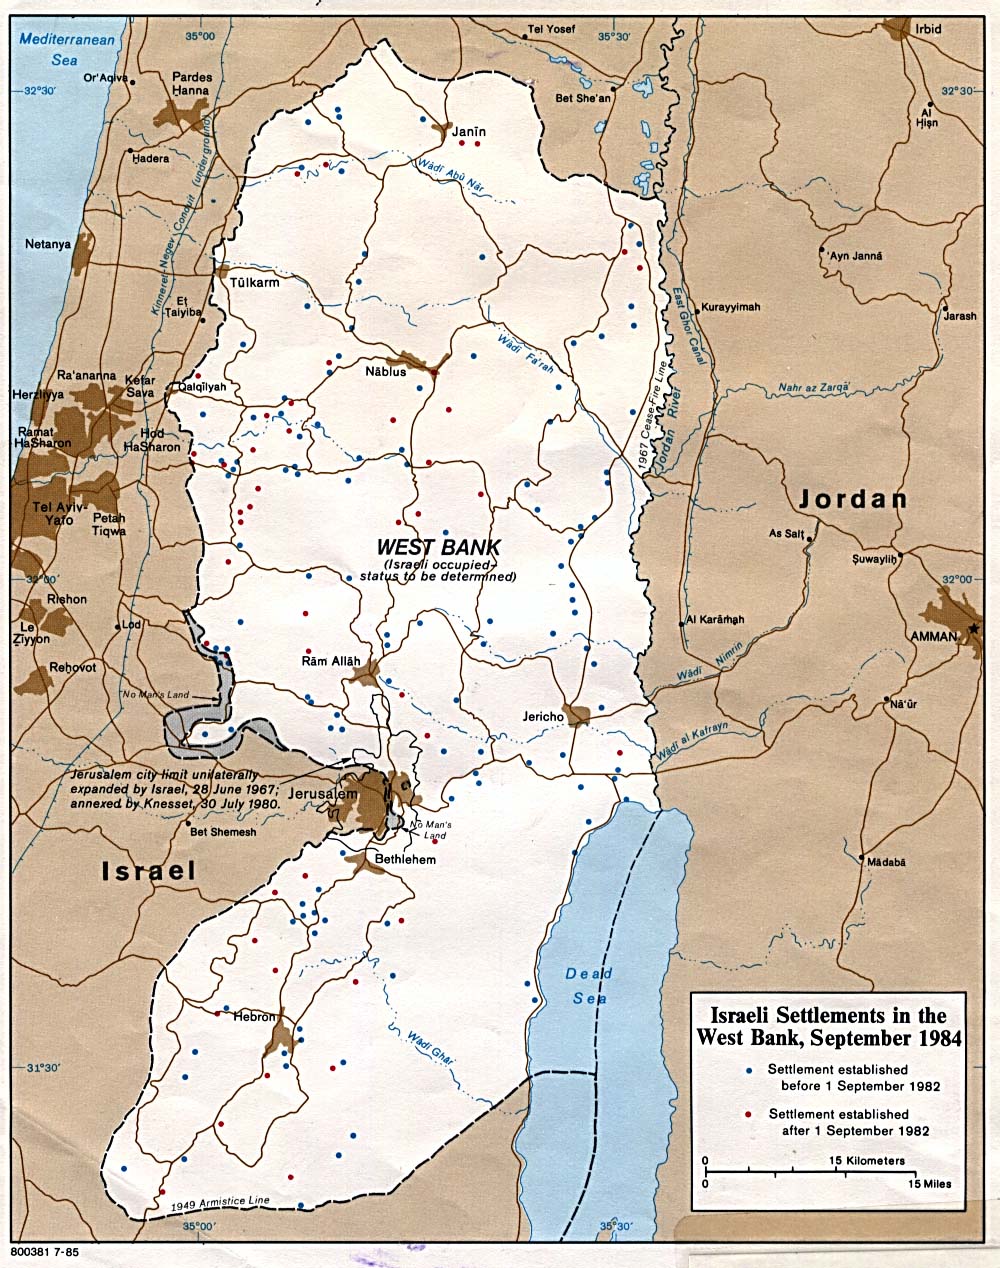 Map Of West Bank and Gaza Strip. Israeli Settlements in the West Bank 1985 (278K) 